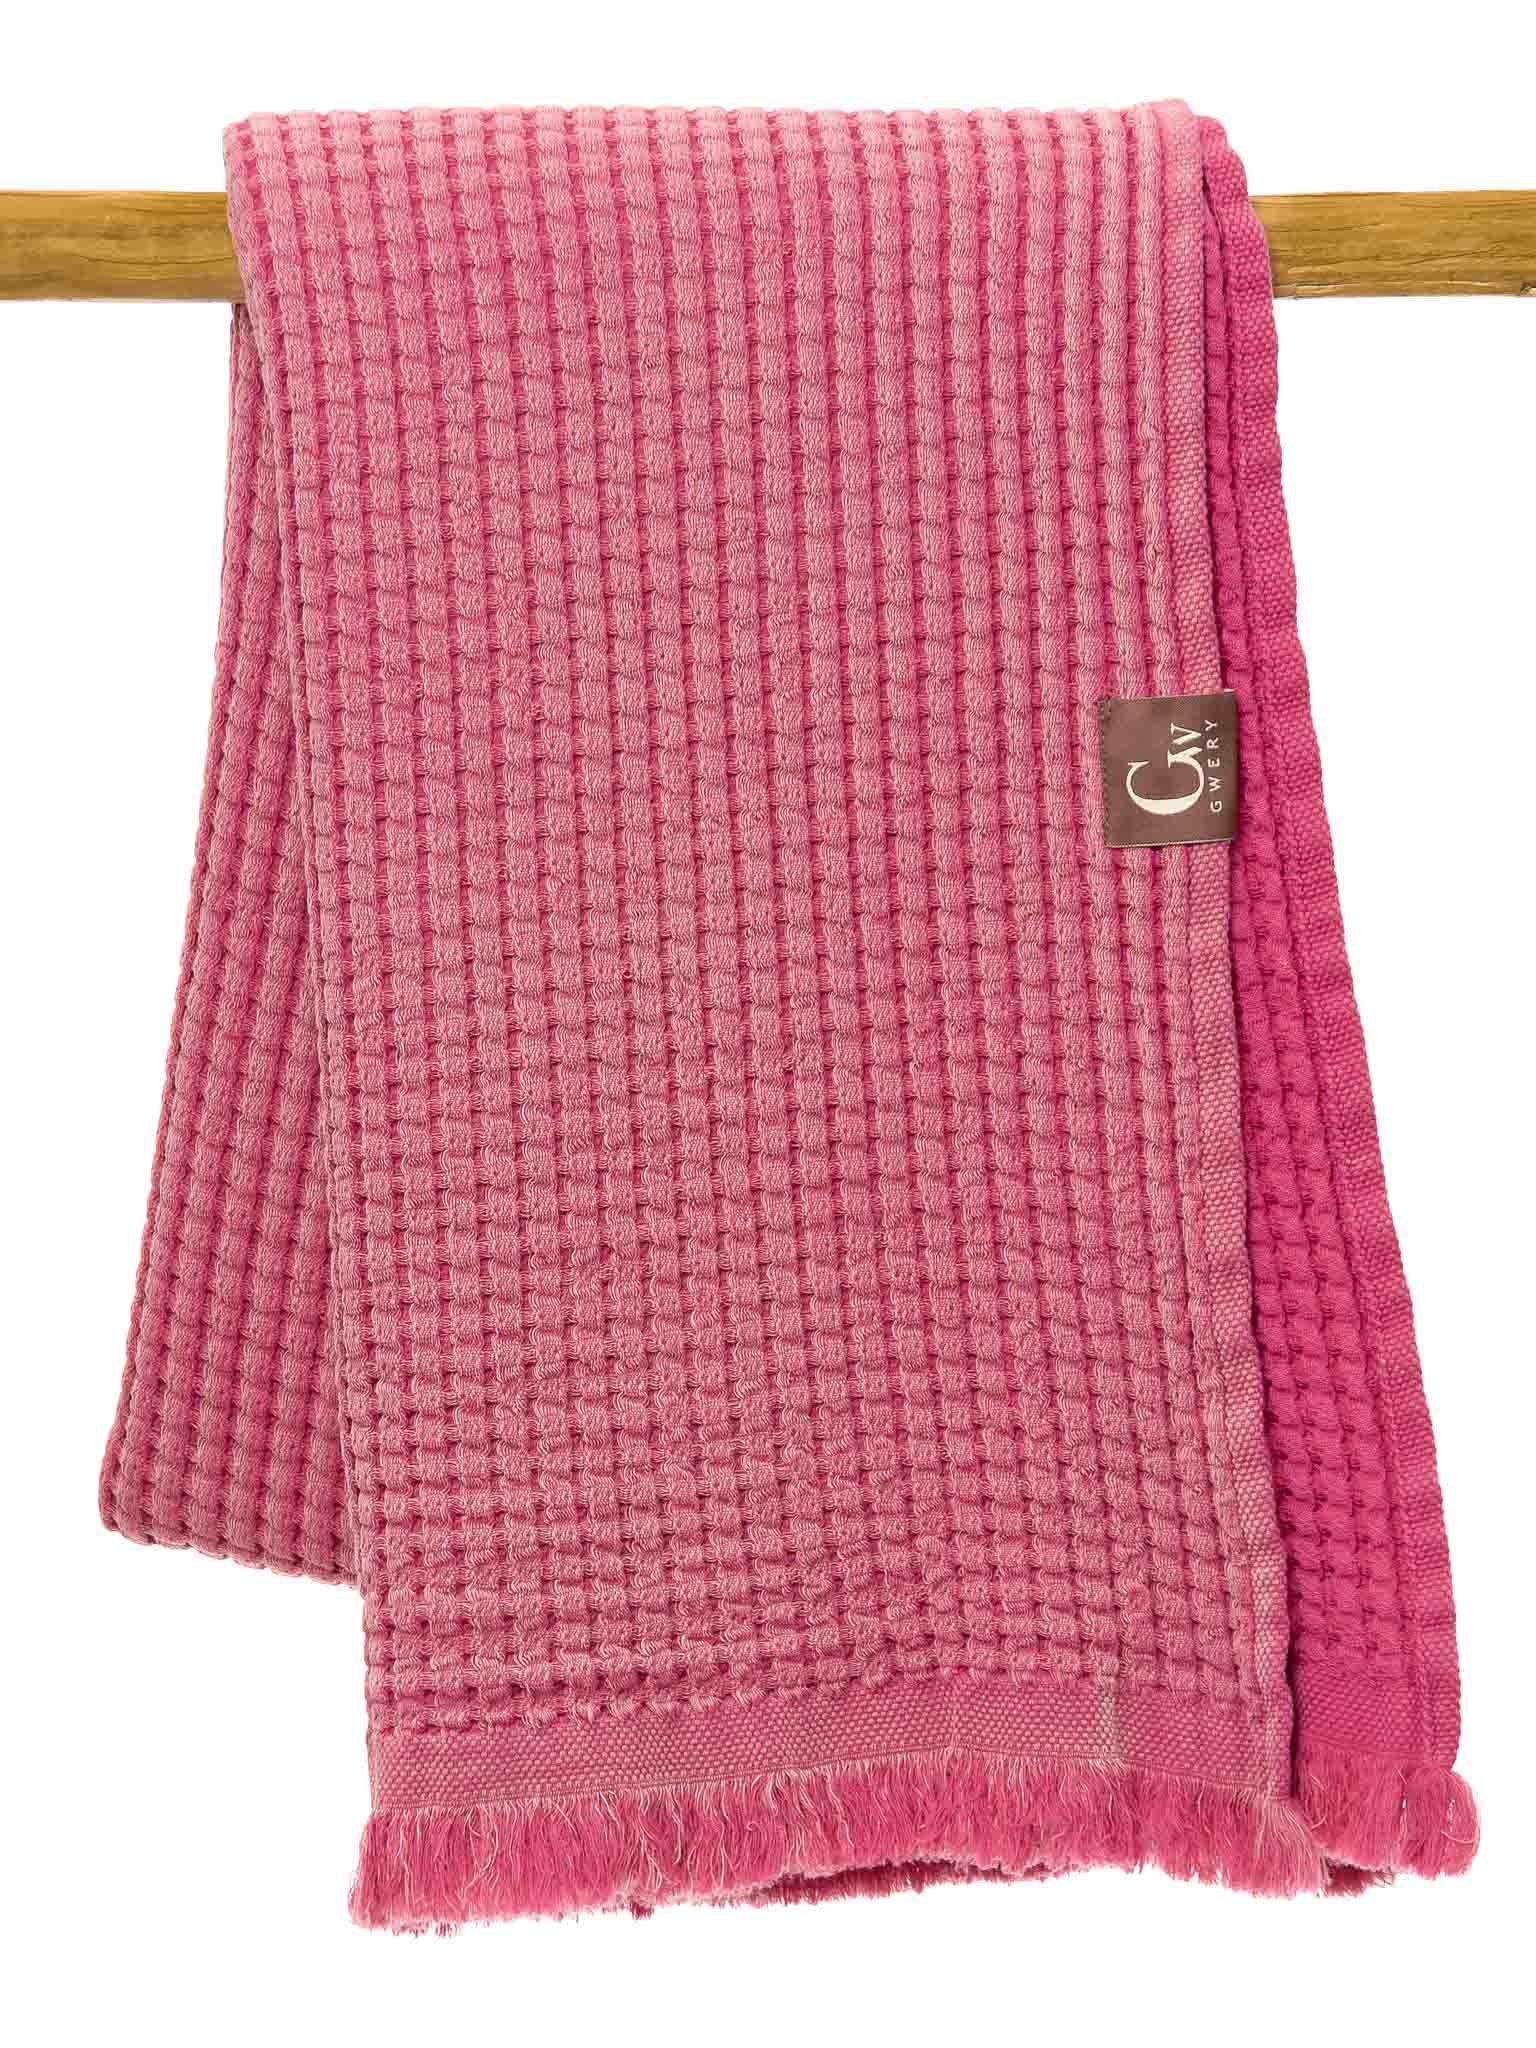 Pink double sided, honeycomb beach towel folded